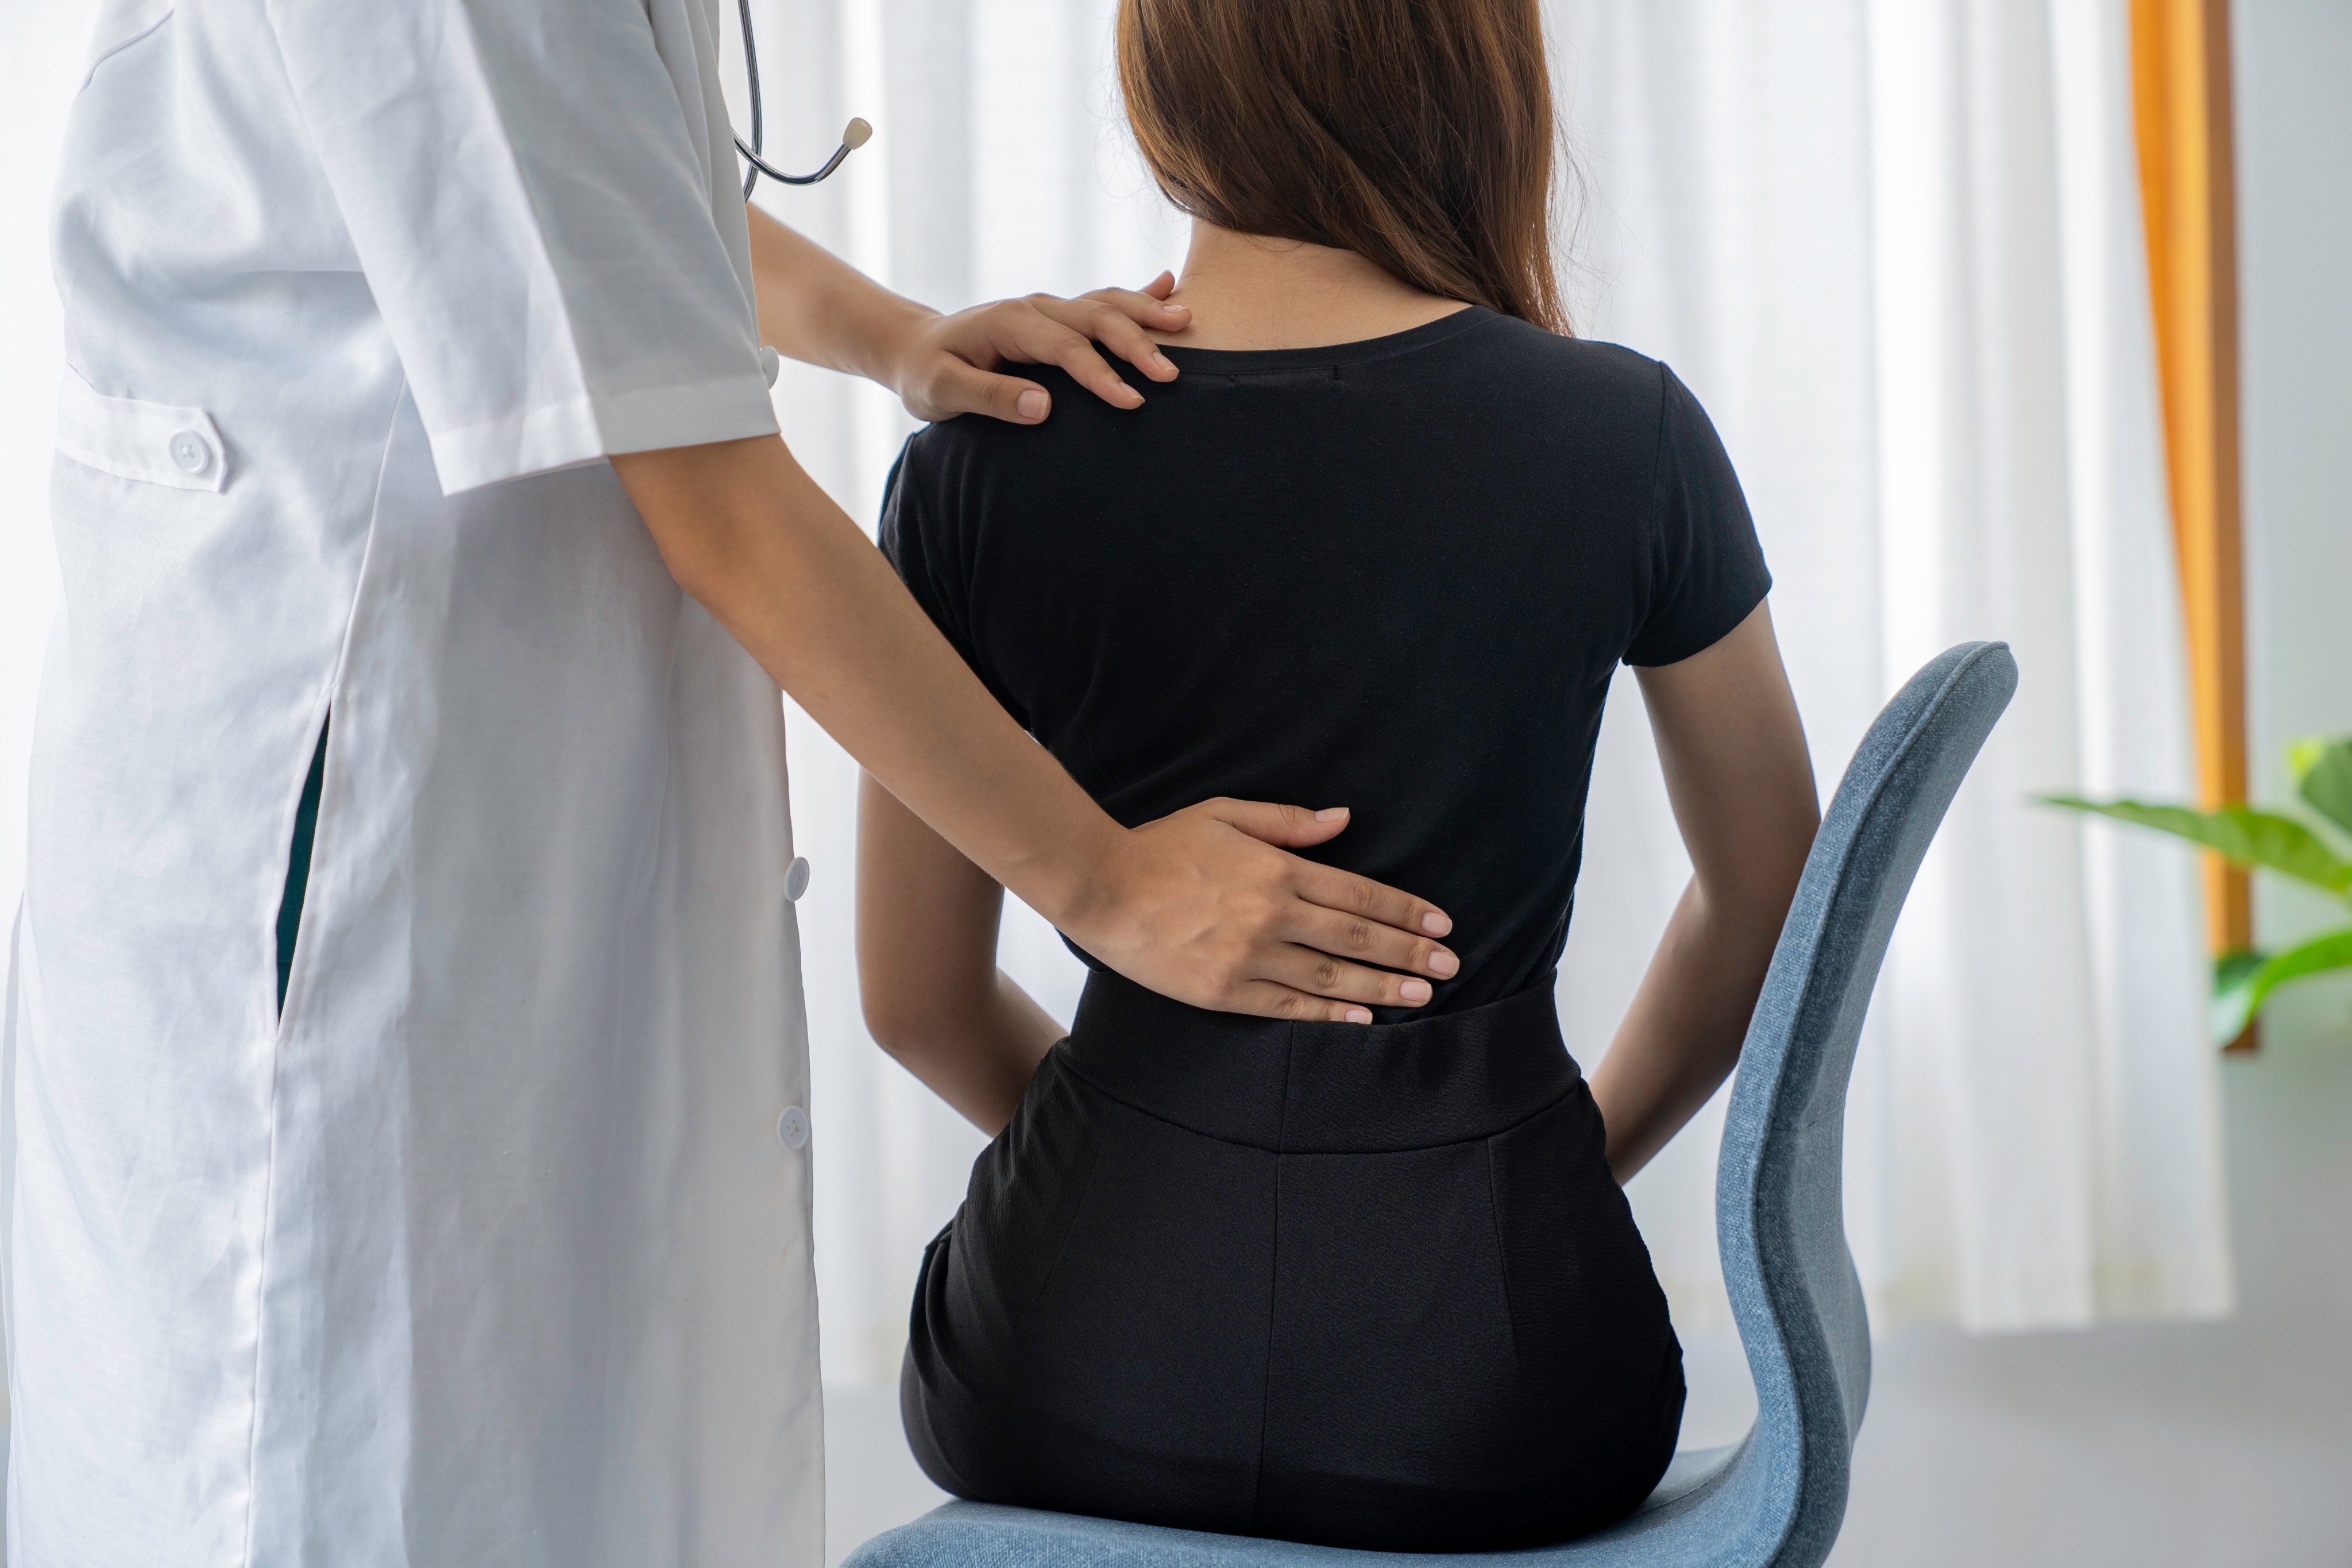 The watchdog also warned about treatments that claimed to eradicate pain, saying some were unsupported by scientific evidence. Photo: Shutterstock 